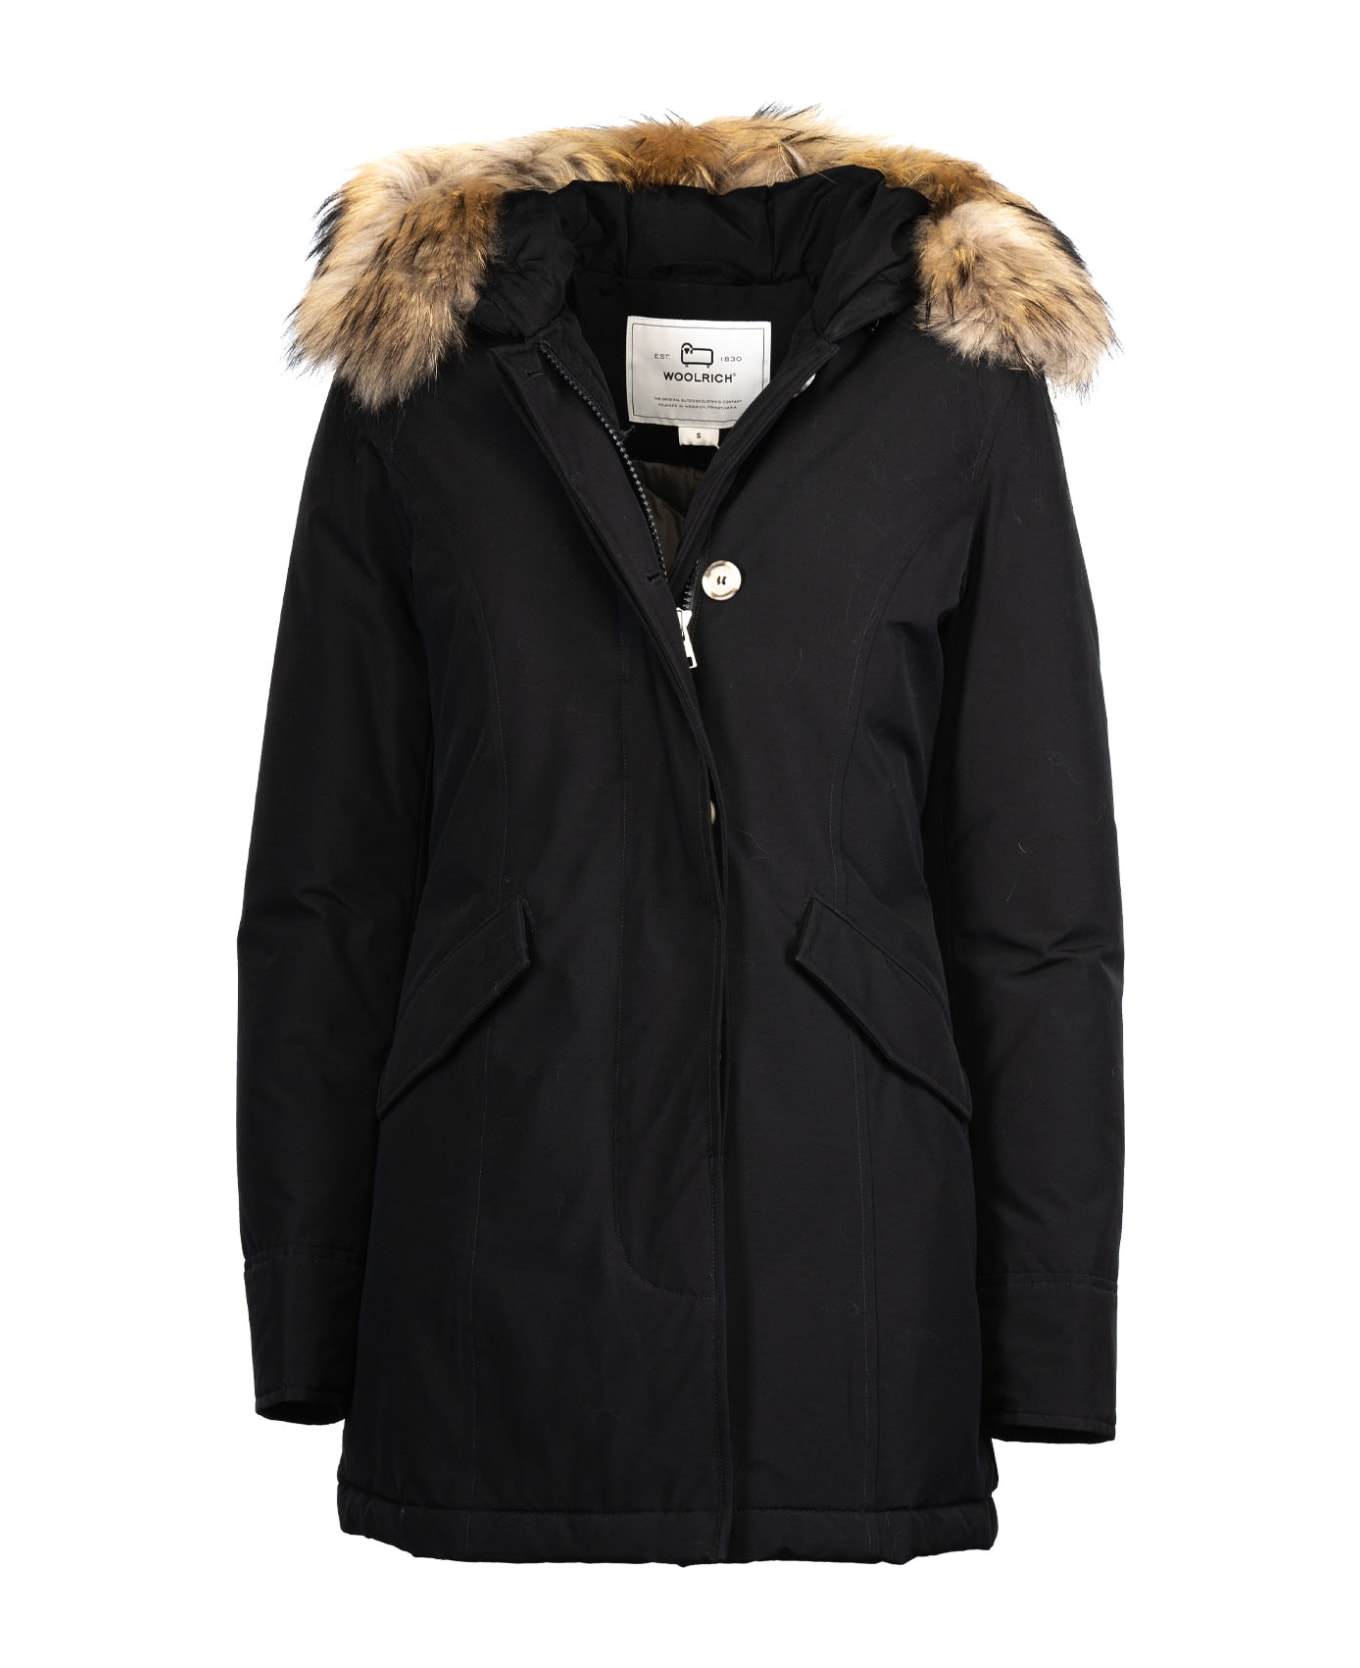 Woolrich Arctic Racoon Parka - Nero